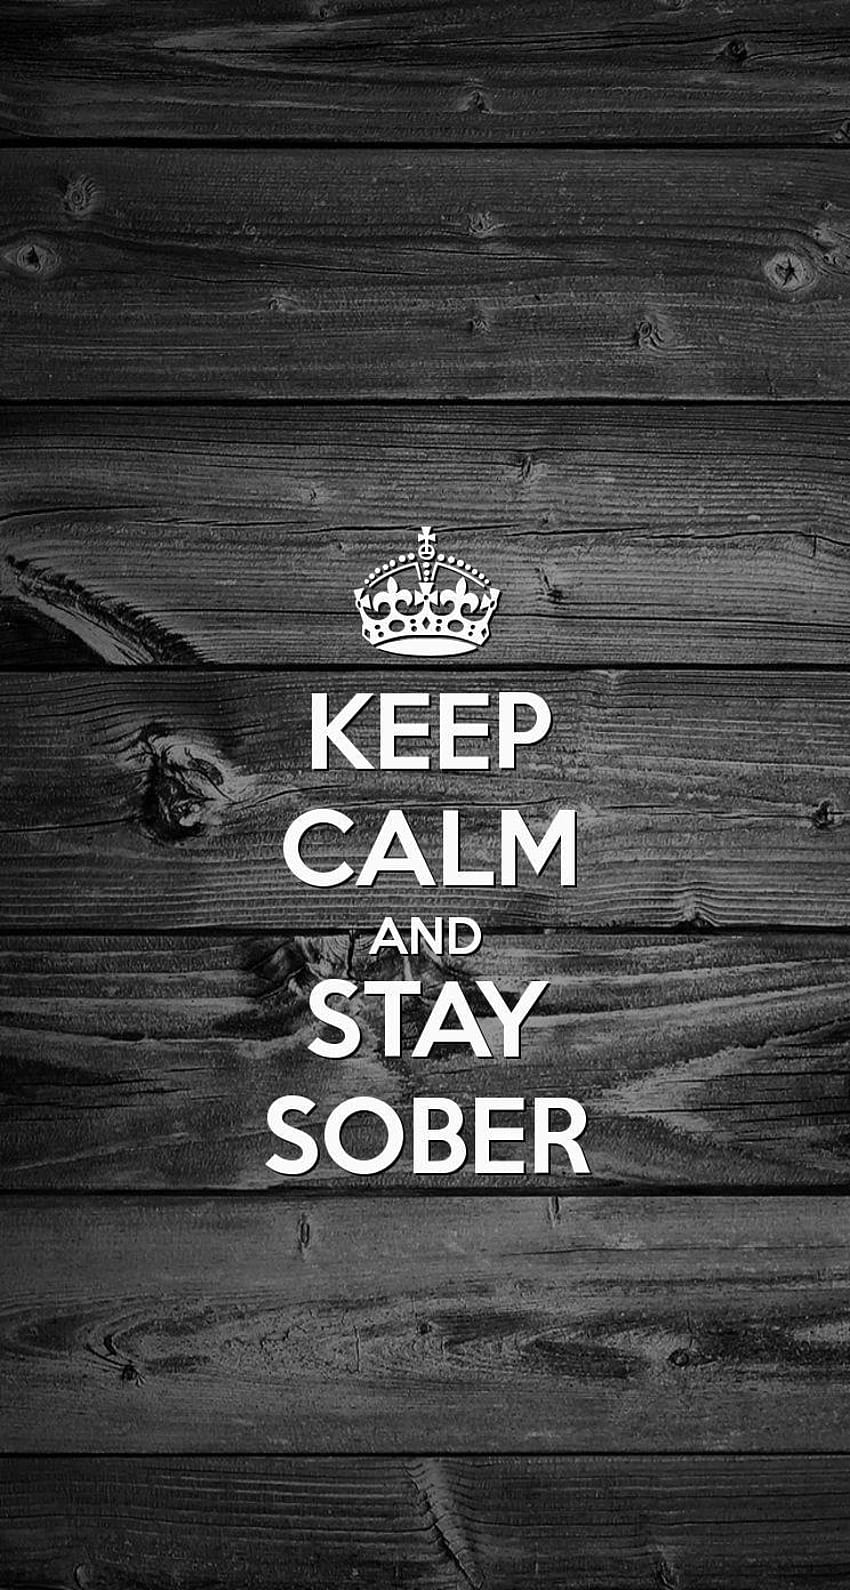 Keep calm and stay sober!!, sobriety HD phone wallpaper